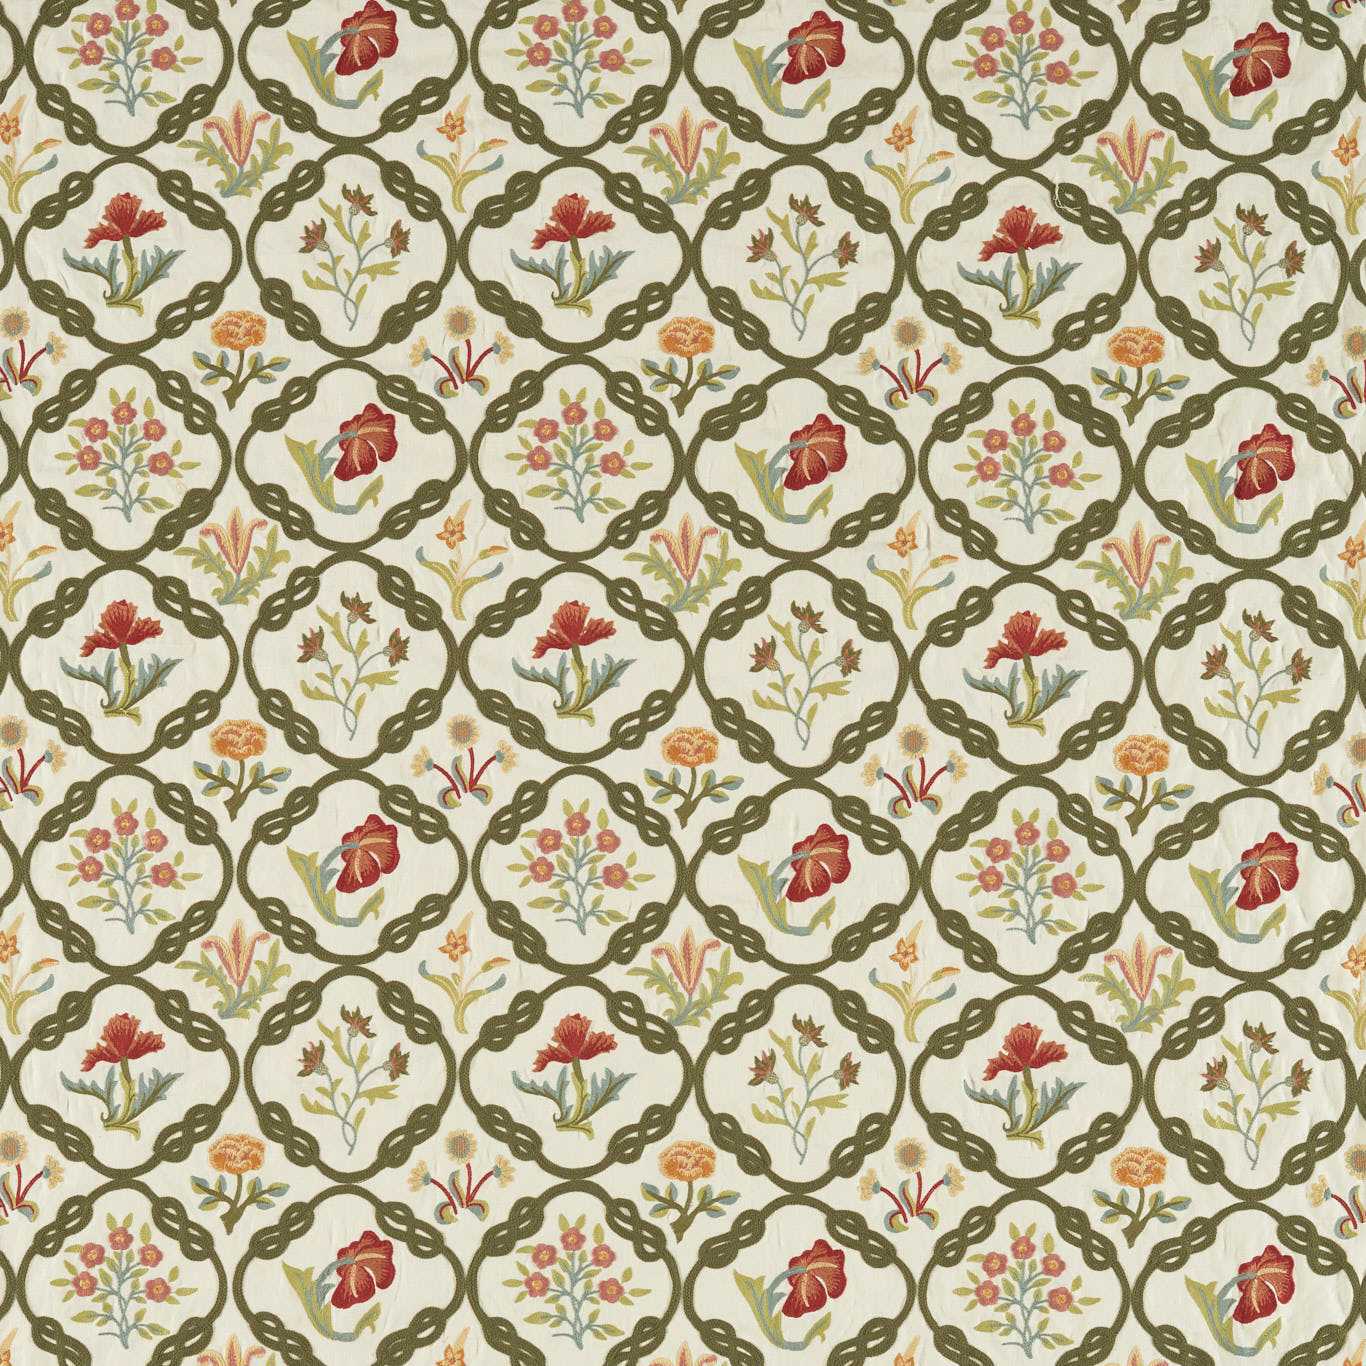 May’s Coverlet Twining Vine Fabric by MOR